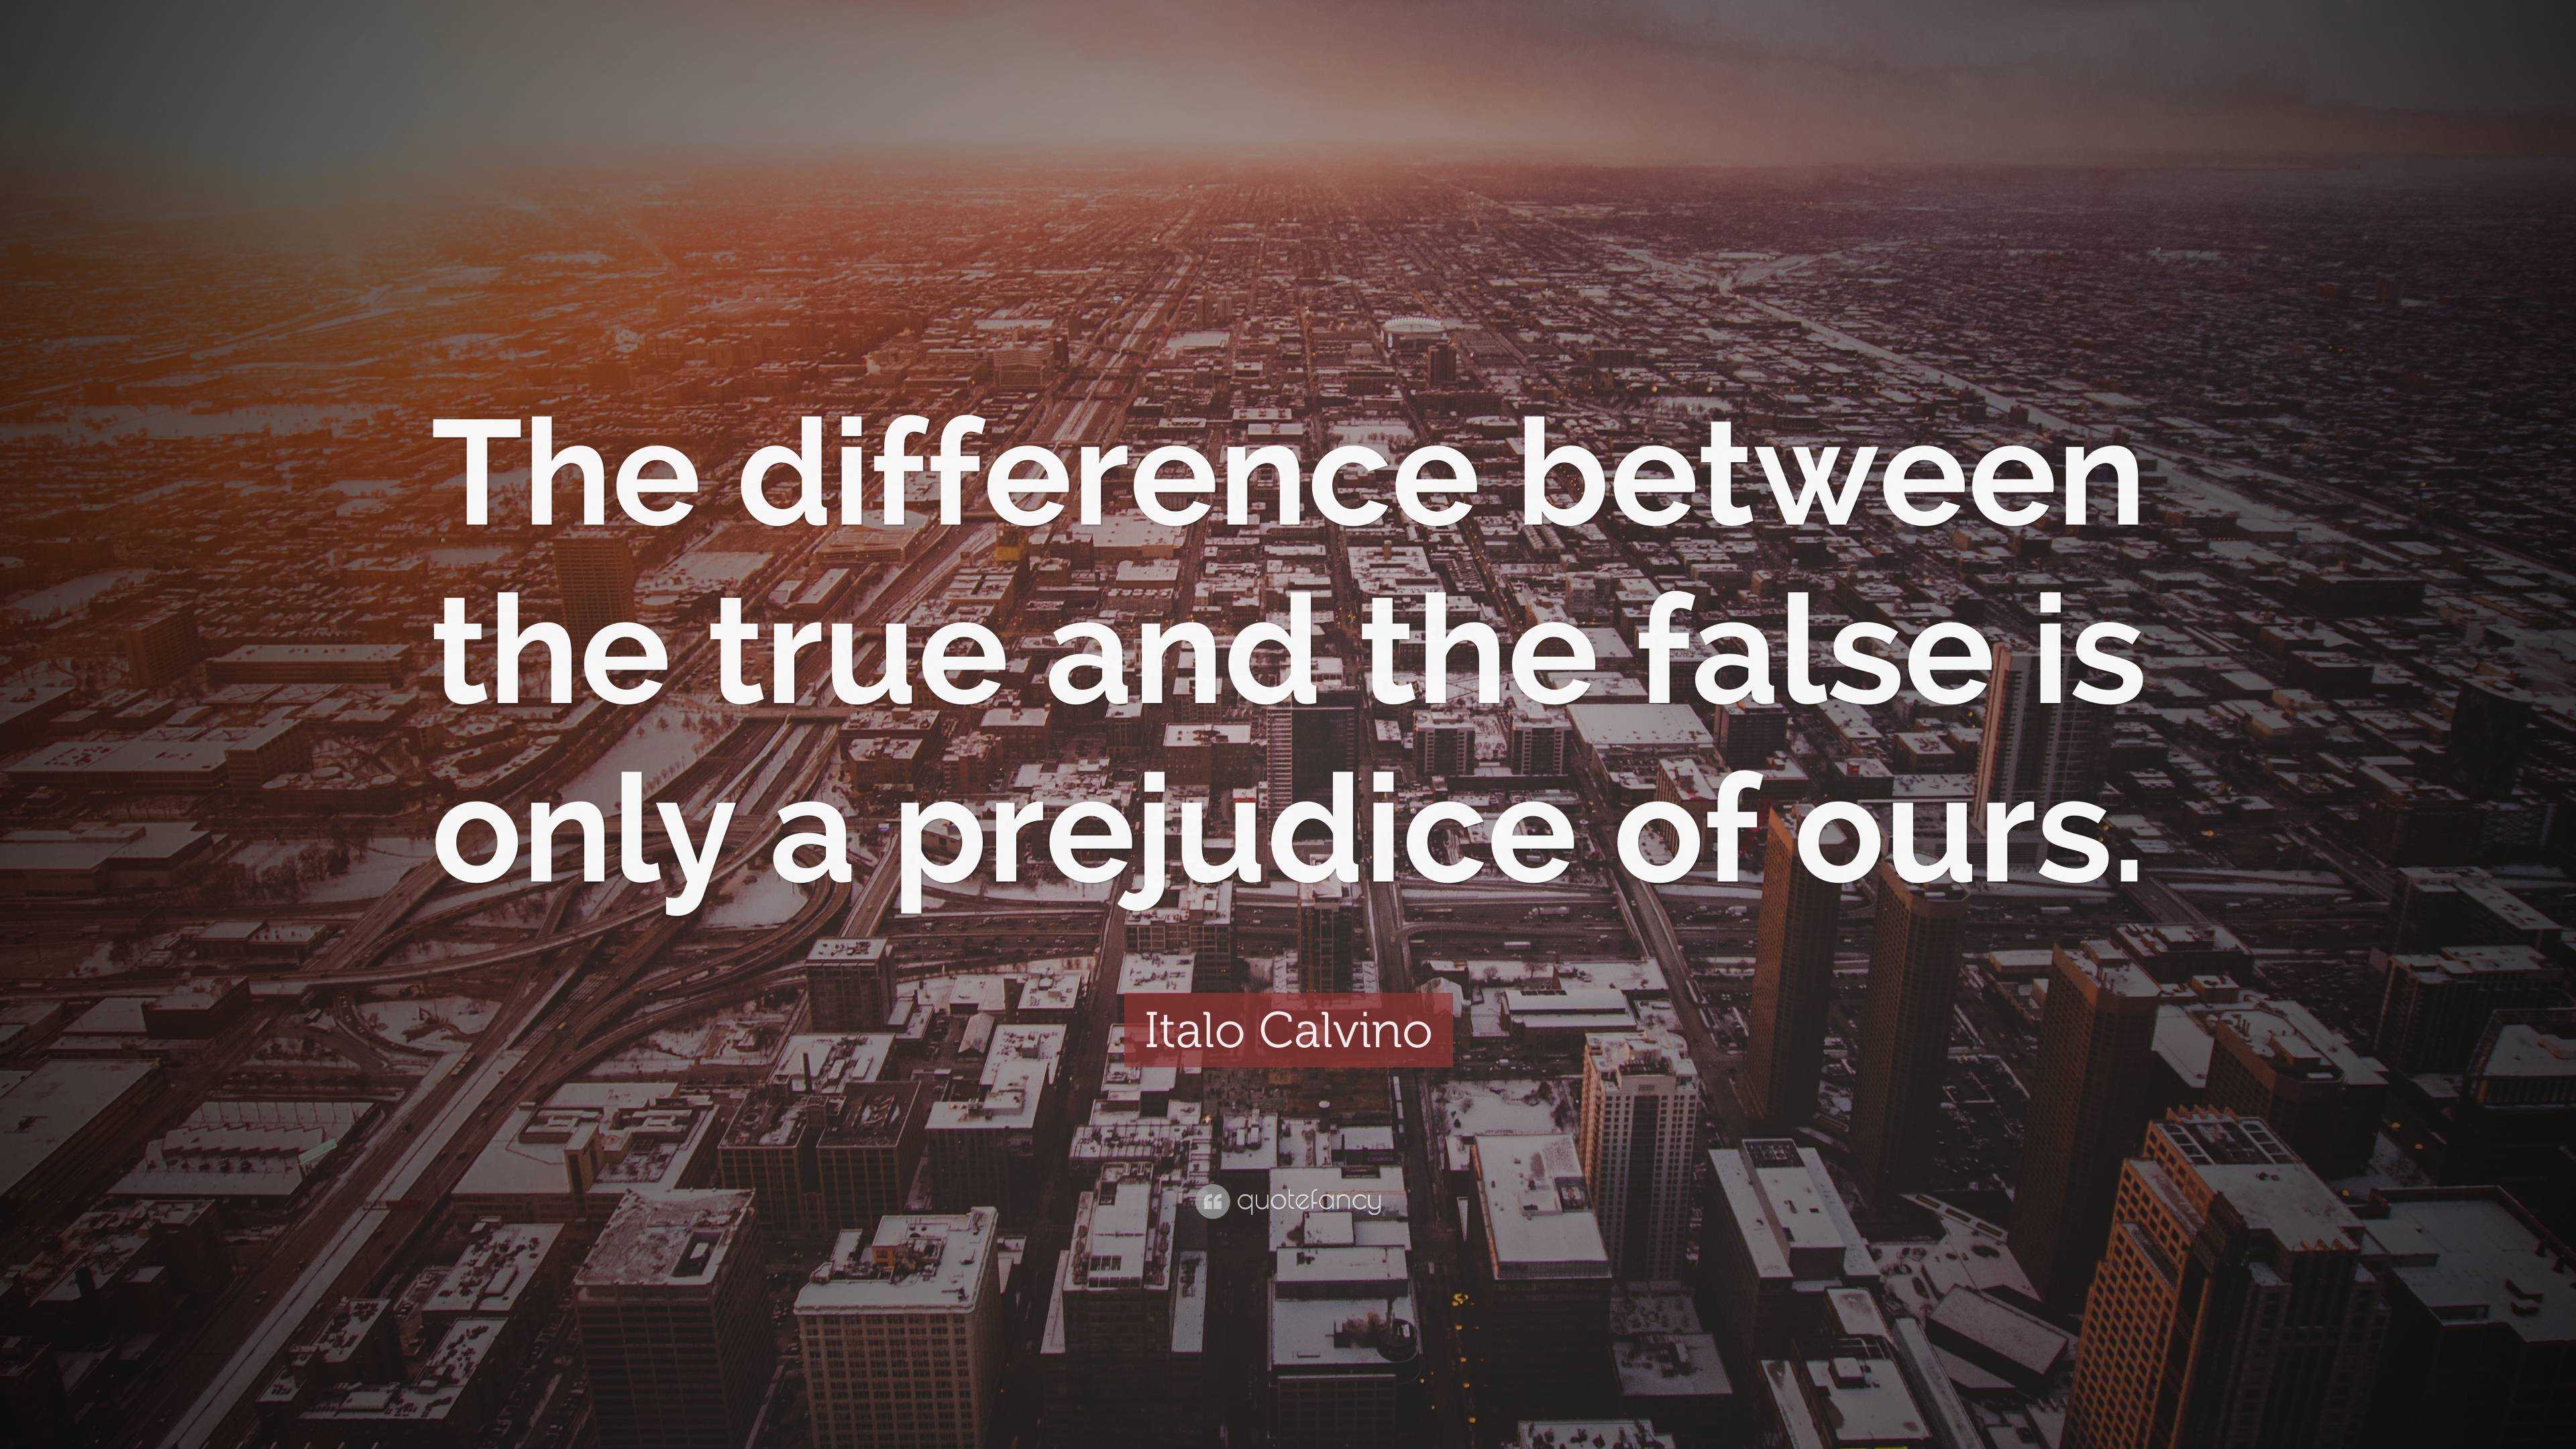 Italo Calvino Quote: “The difference between the true and the false is ...